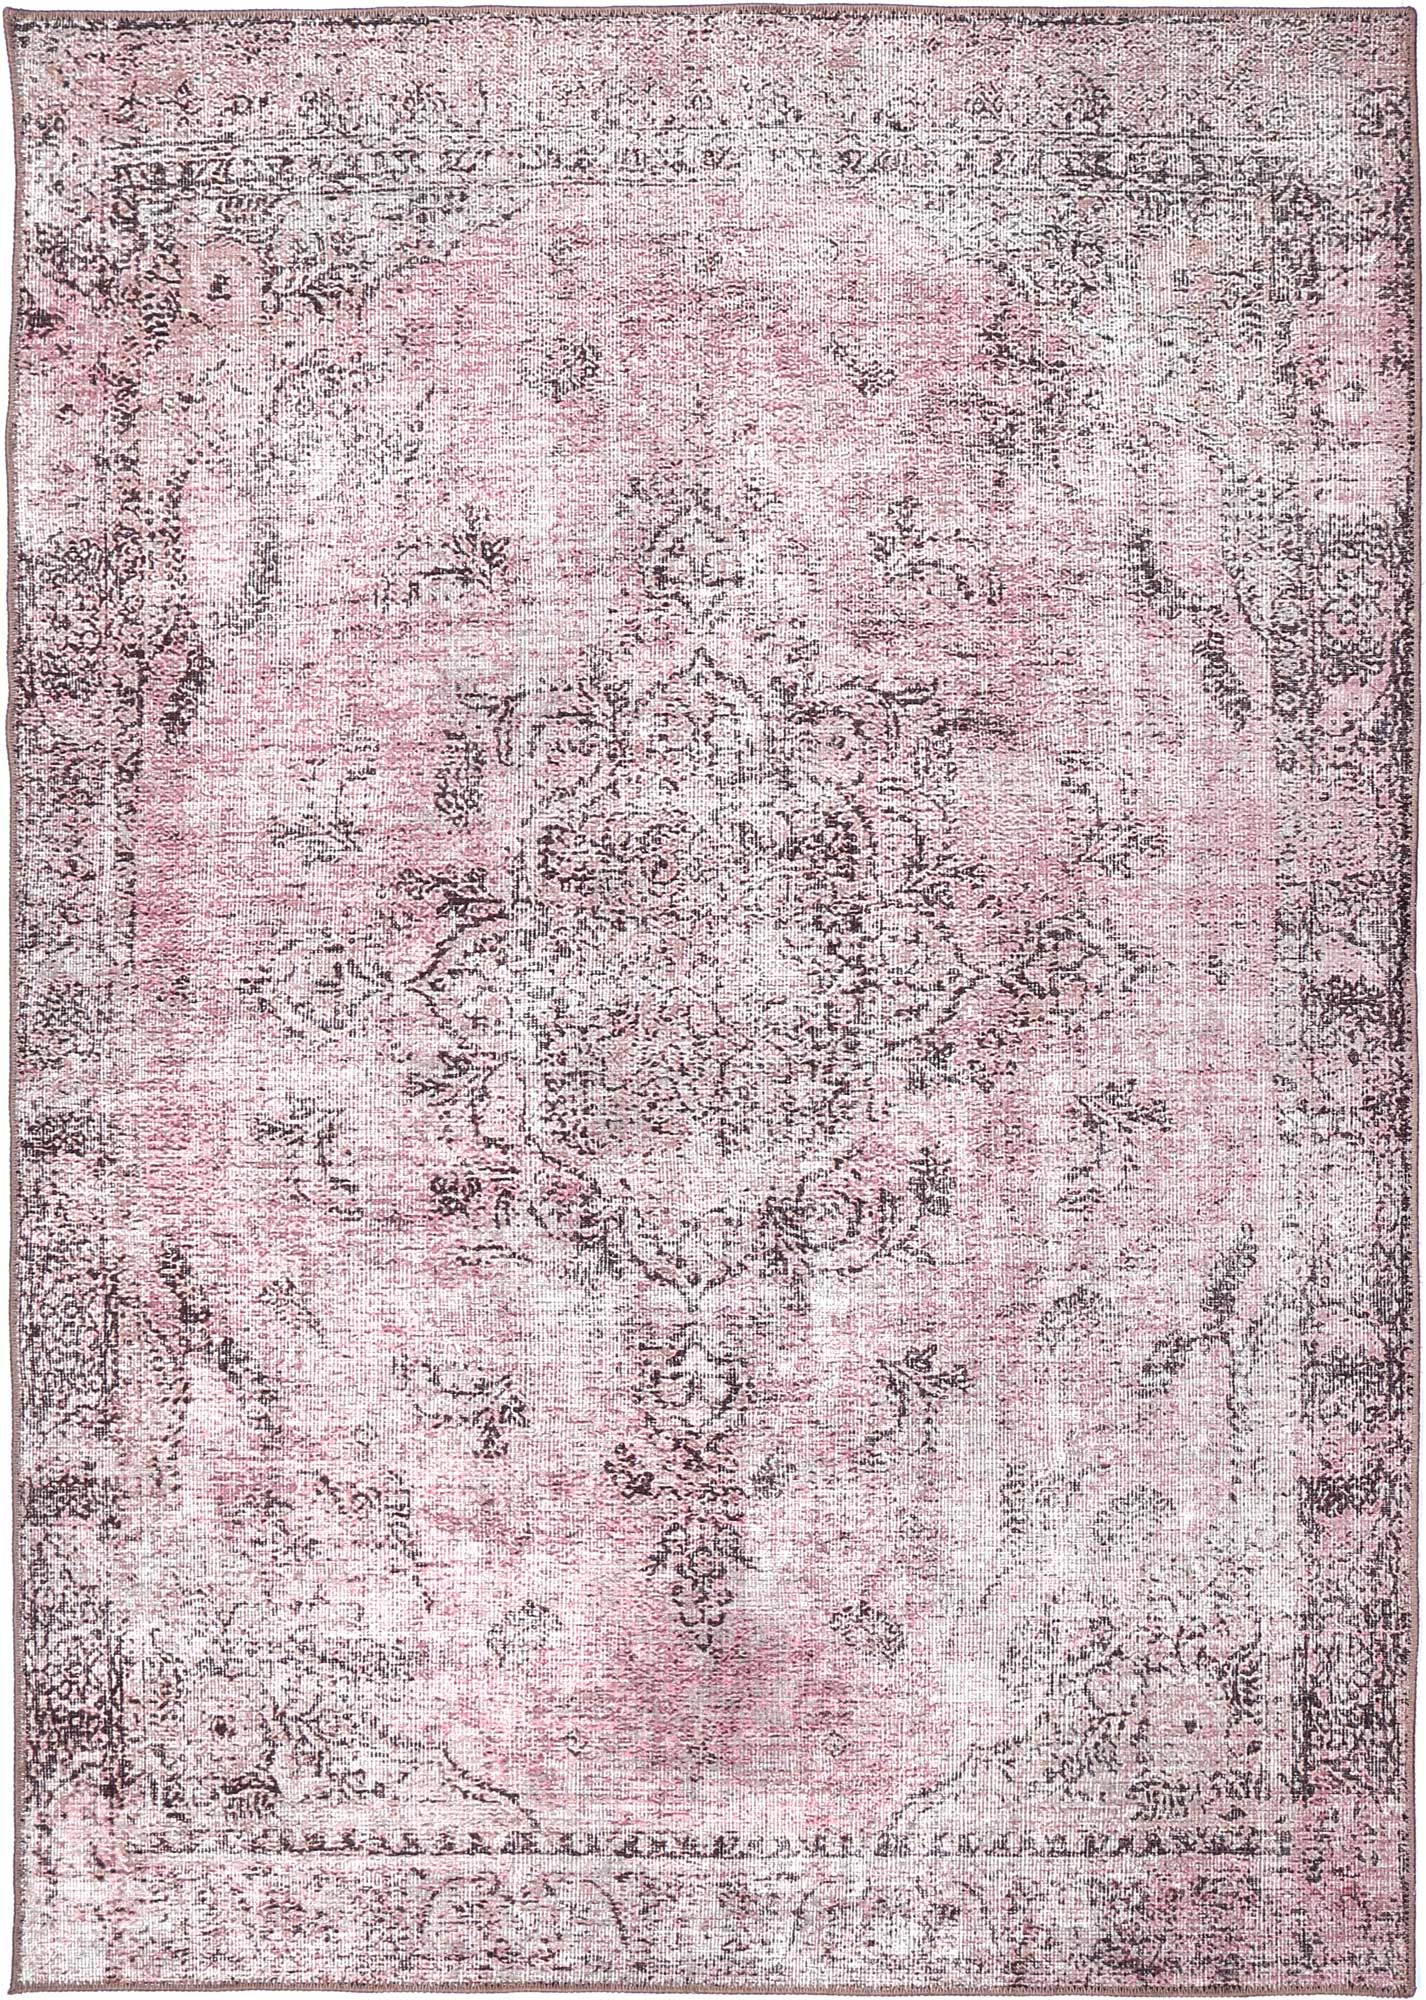 Spills and accidents are no match for the Germain Rose Rug. This machine washable area rug is stain and water resistant, making it easy to clean and maintain.